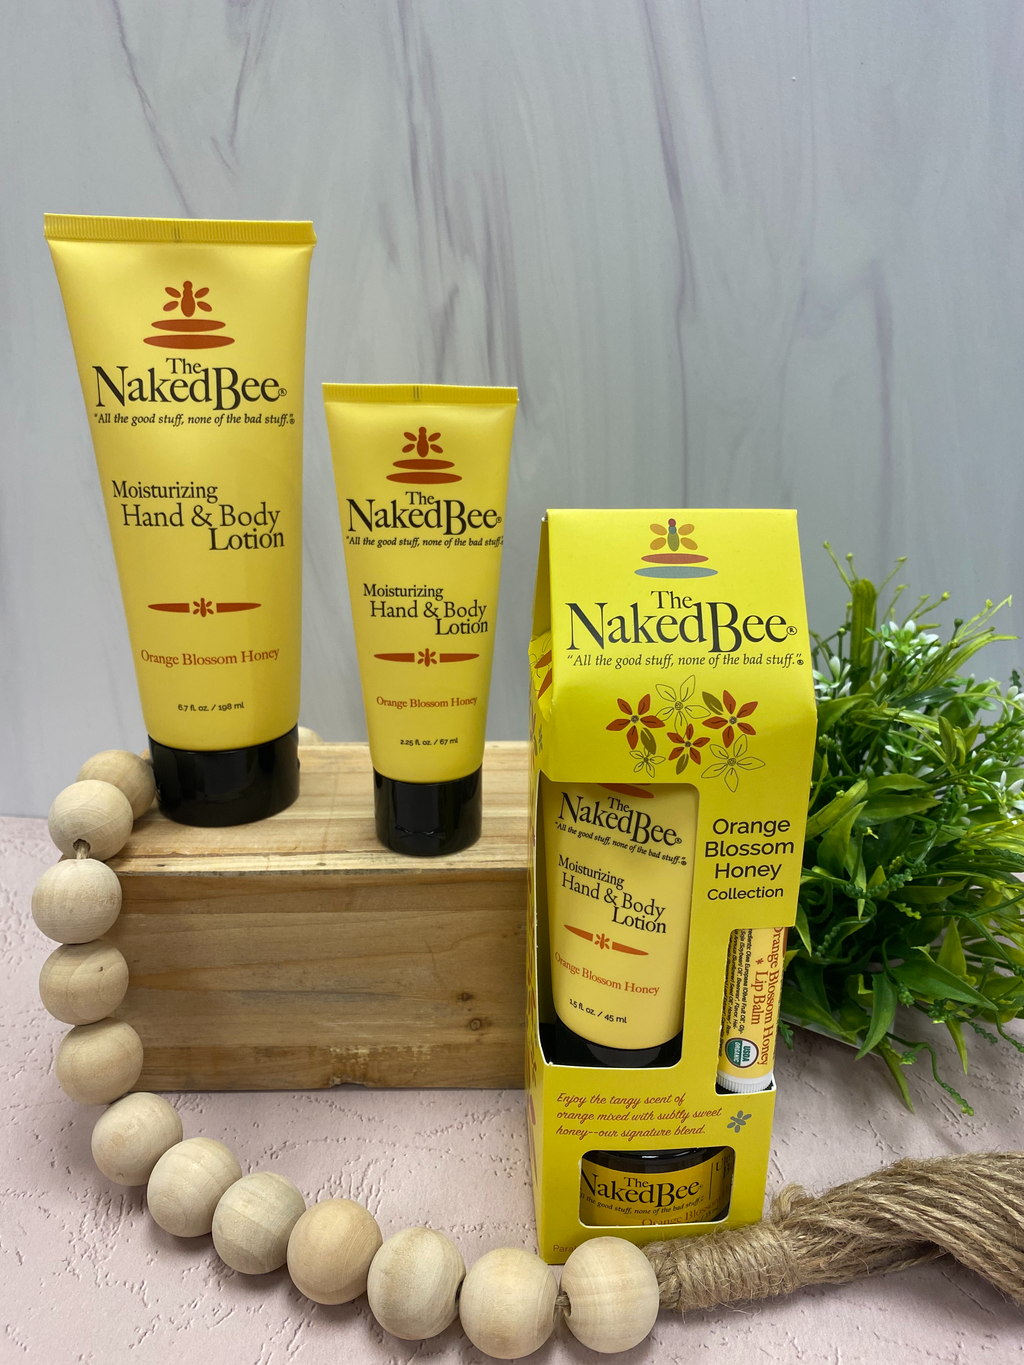 Naked Bee Nag Champa Lotion Niceville Florist - Katie's House of Flowers